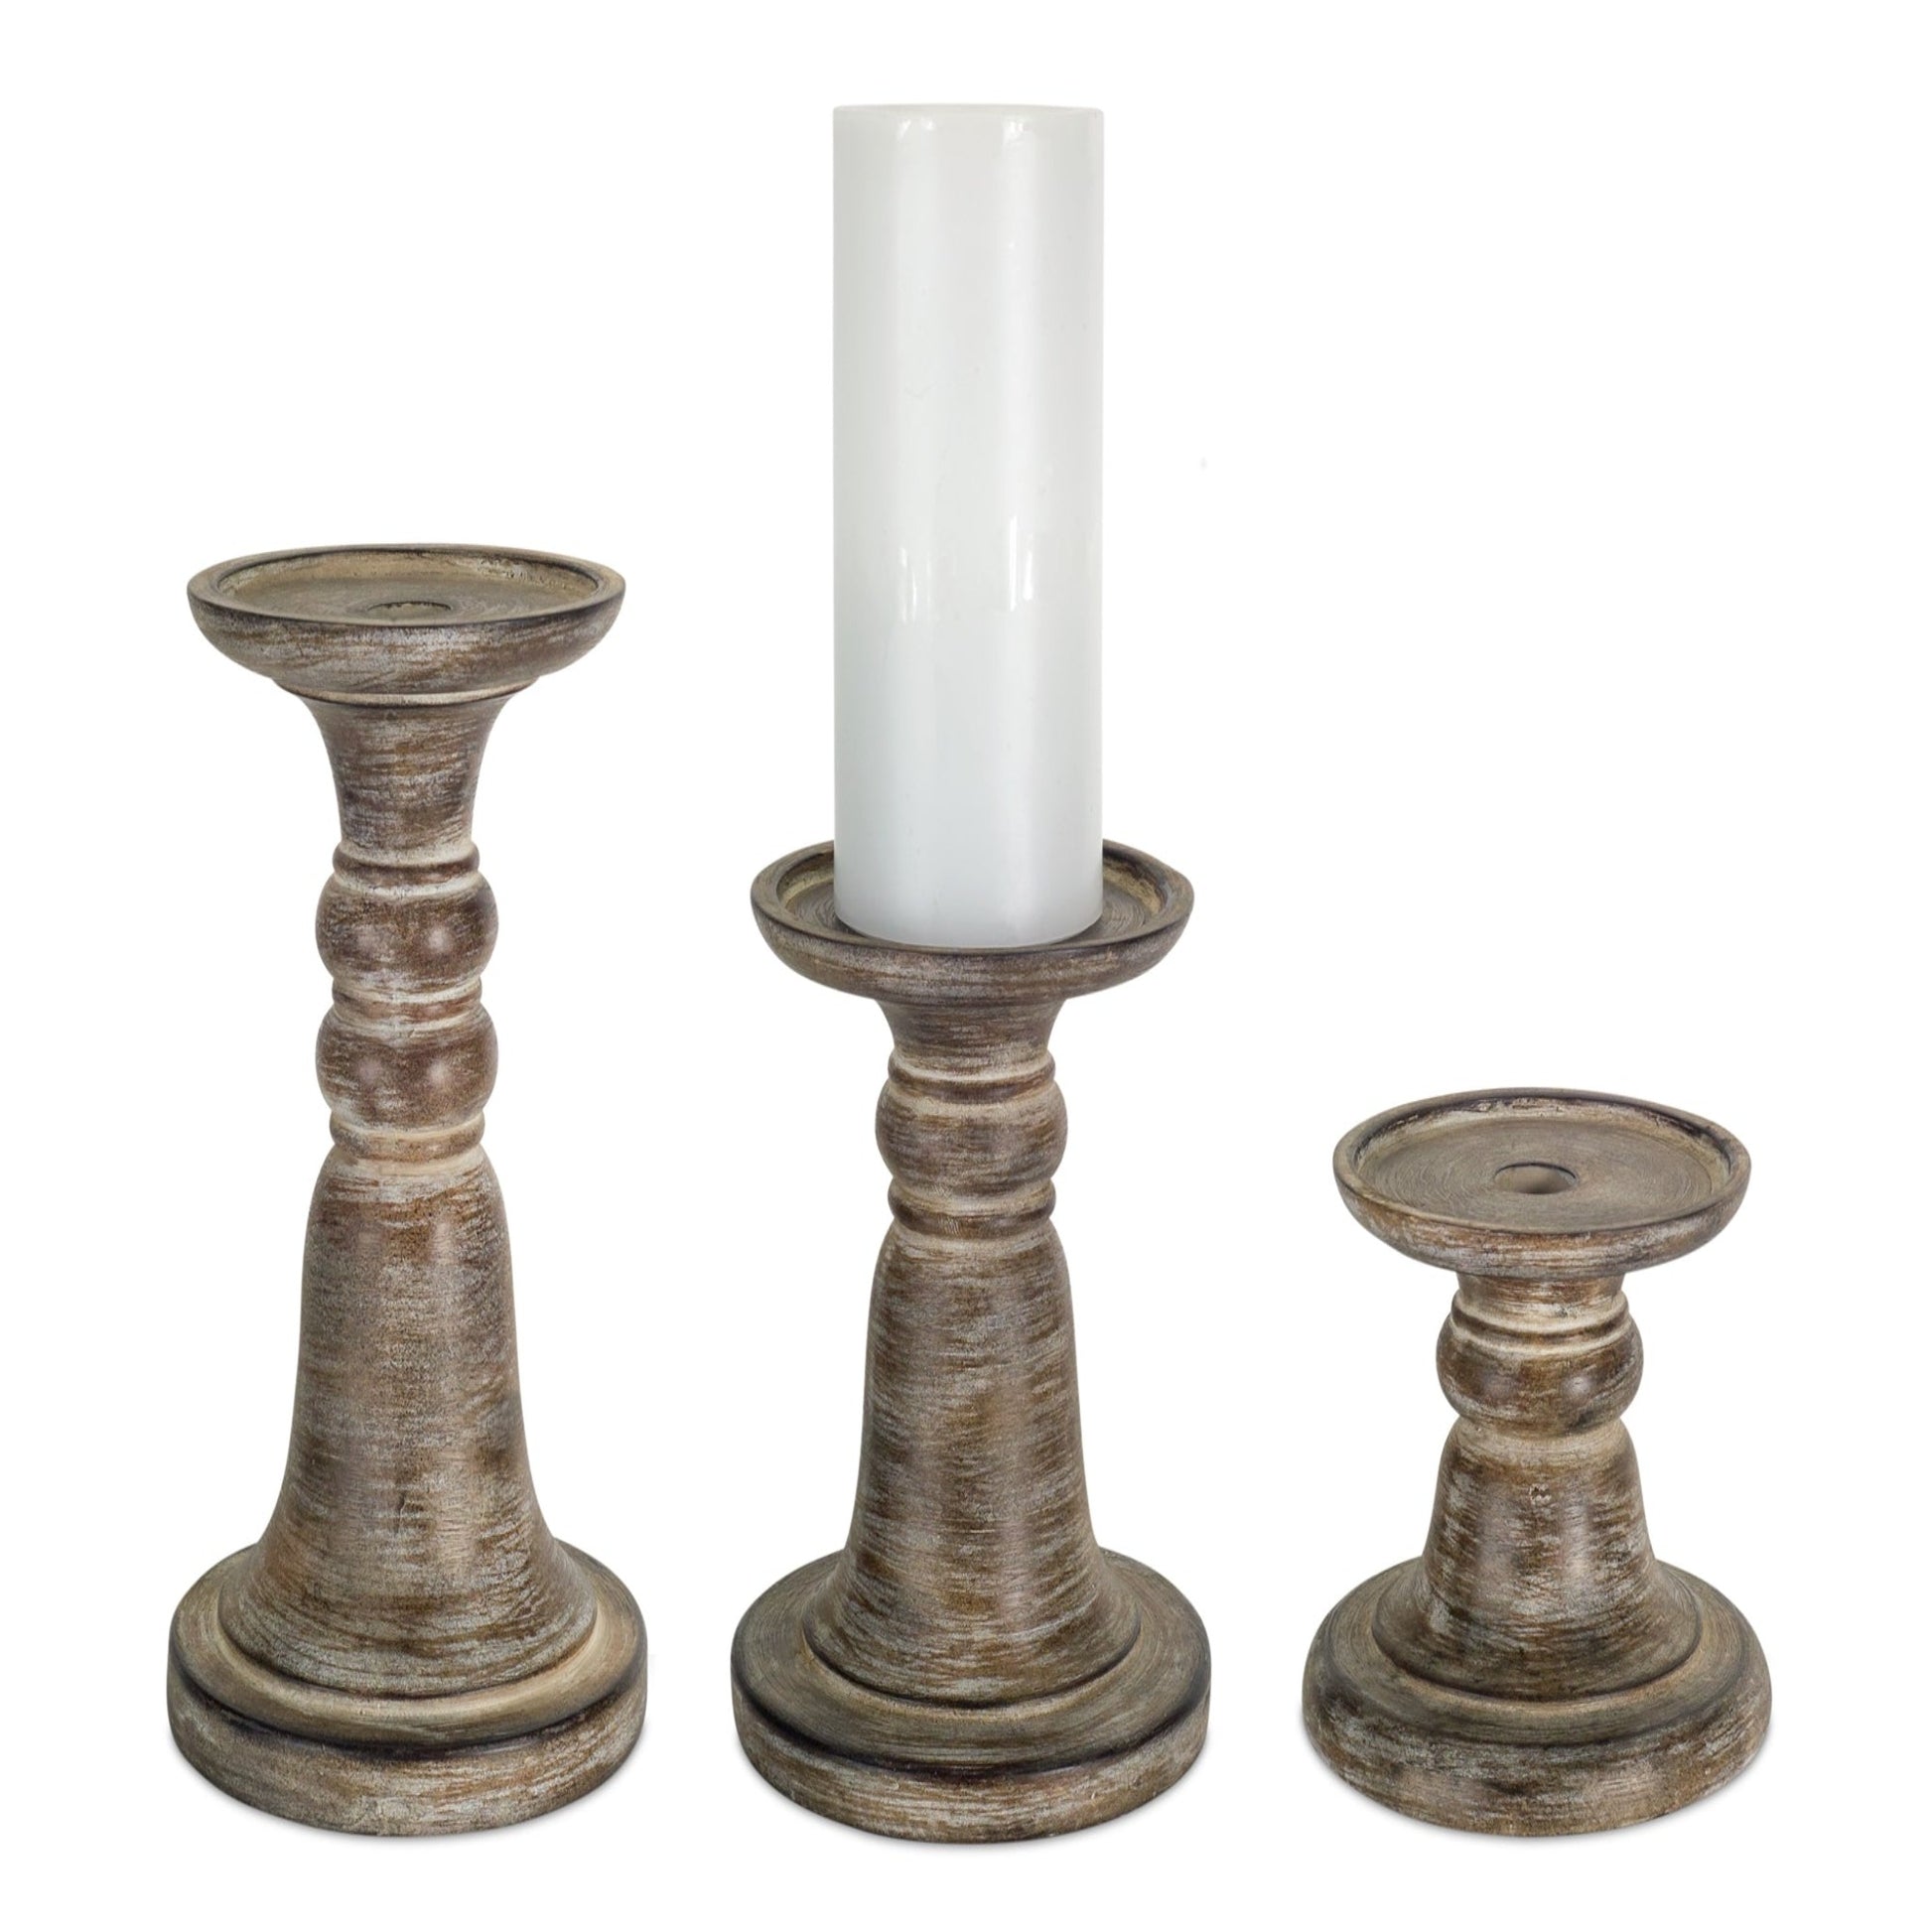 Rustic stone candle holders, set of  3 brown weathered stone candle holders. The classic shape paired with the heavily weathered finish